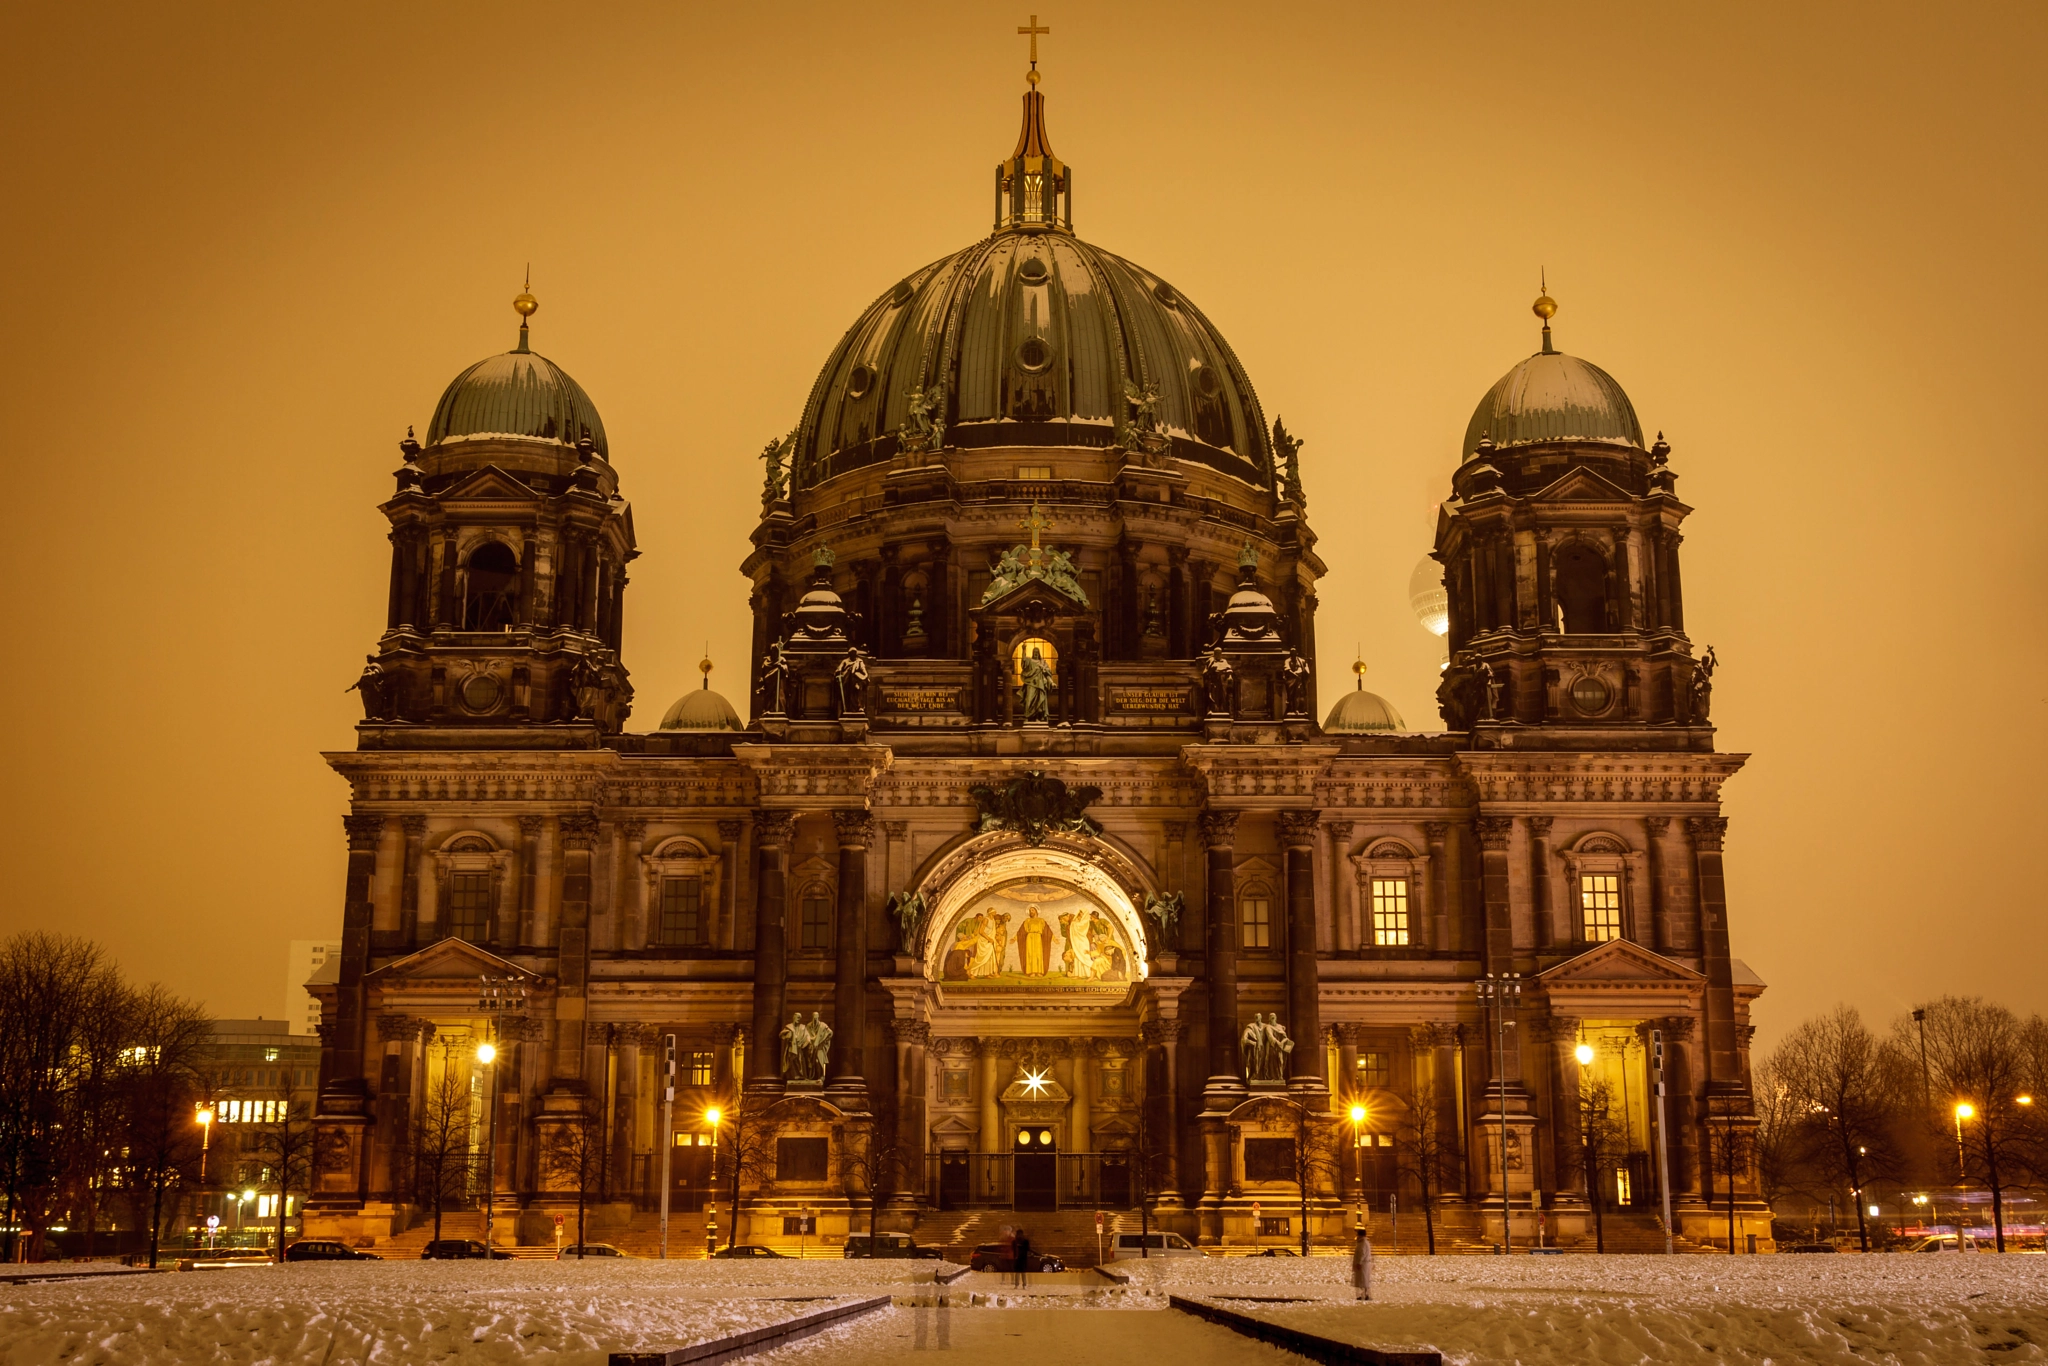 Canon EOS 7D + Sigma 24-105mm f/4 DG OS HSM | A sample photo. Berliner dom photography